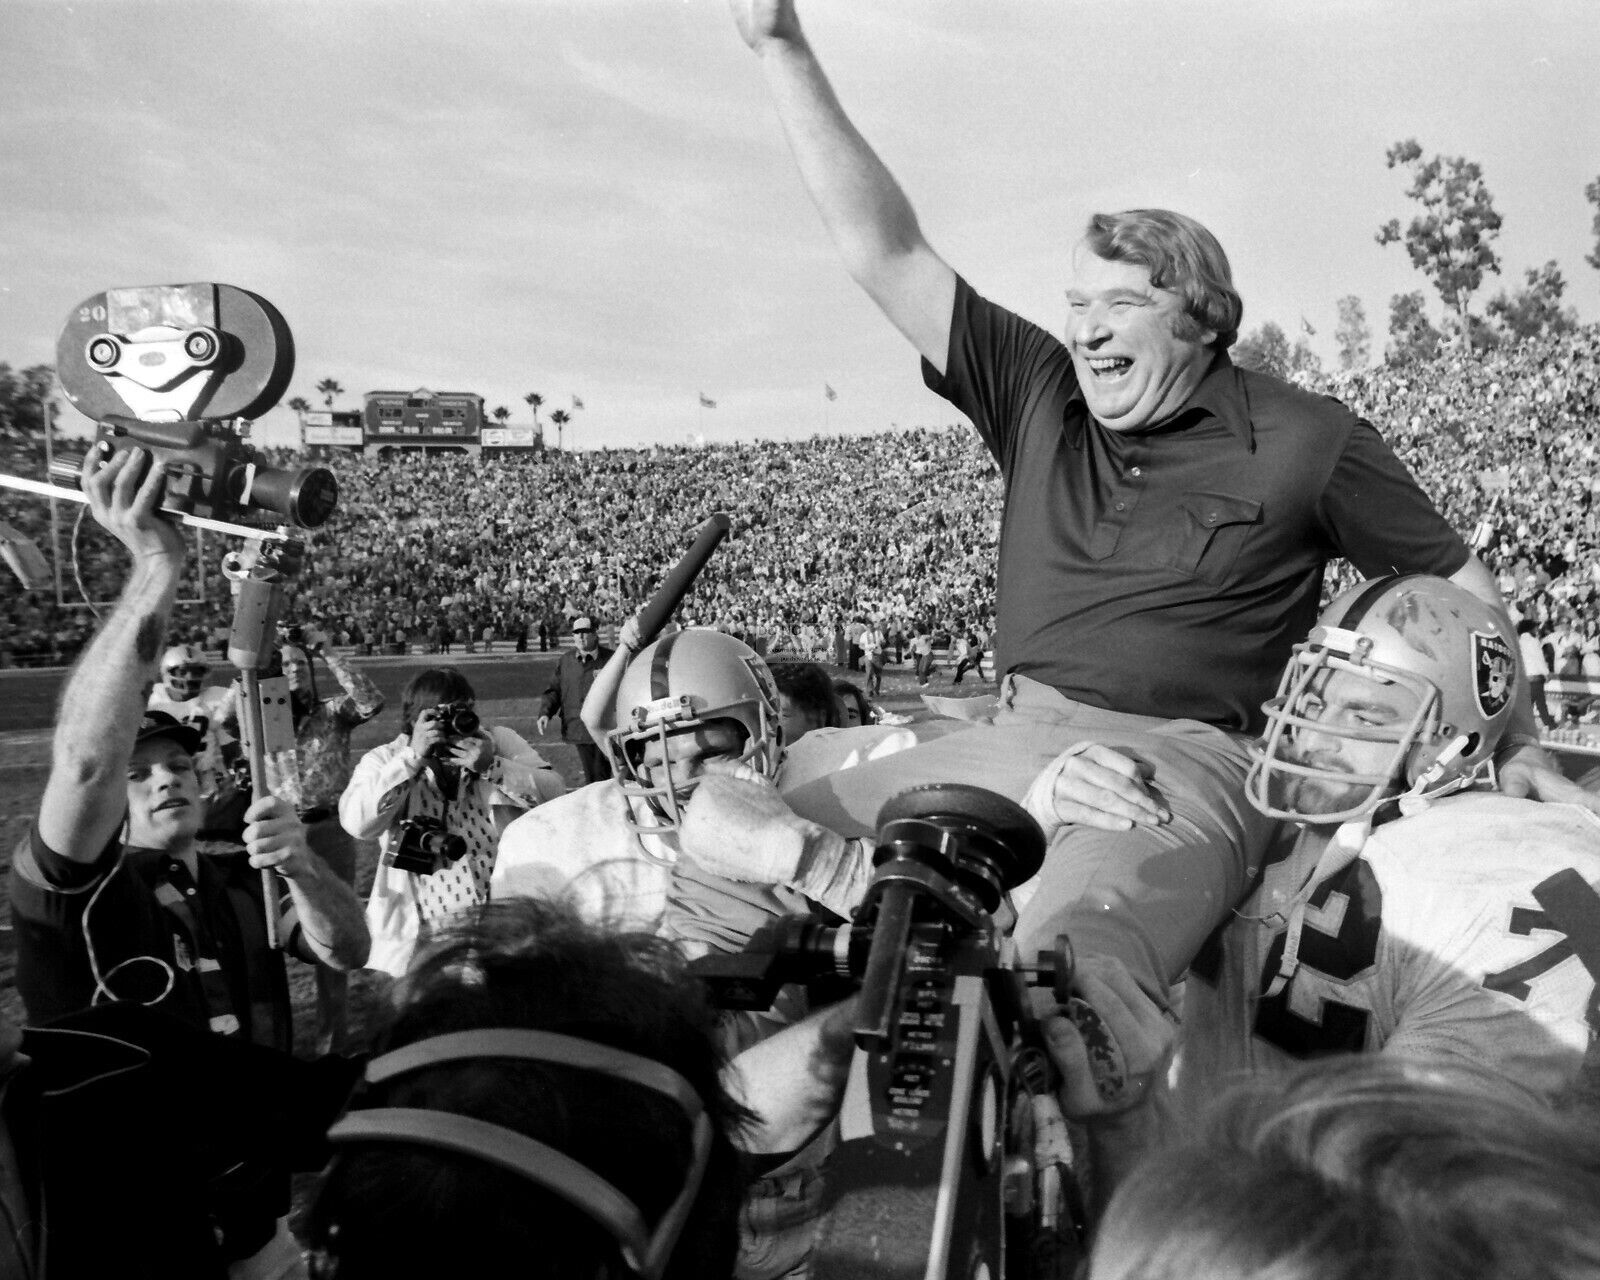 OAKLAND RAIDERS PLAYERS JOHN MADDEN ON SHOULDERS AFTER WIN - 8X10 PHOTO (RT860)